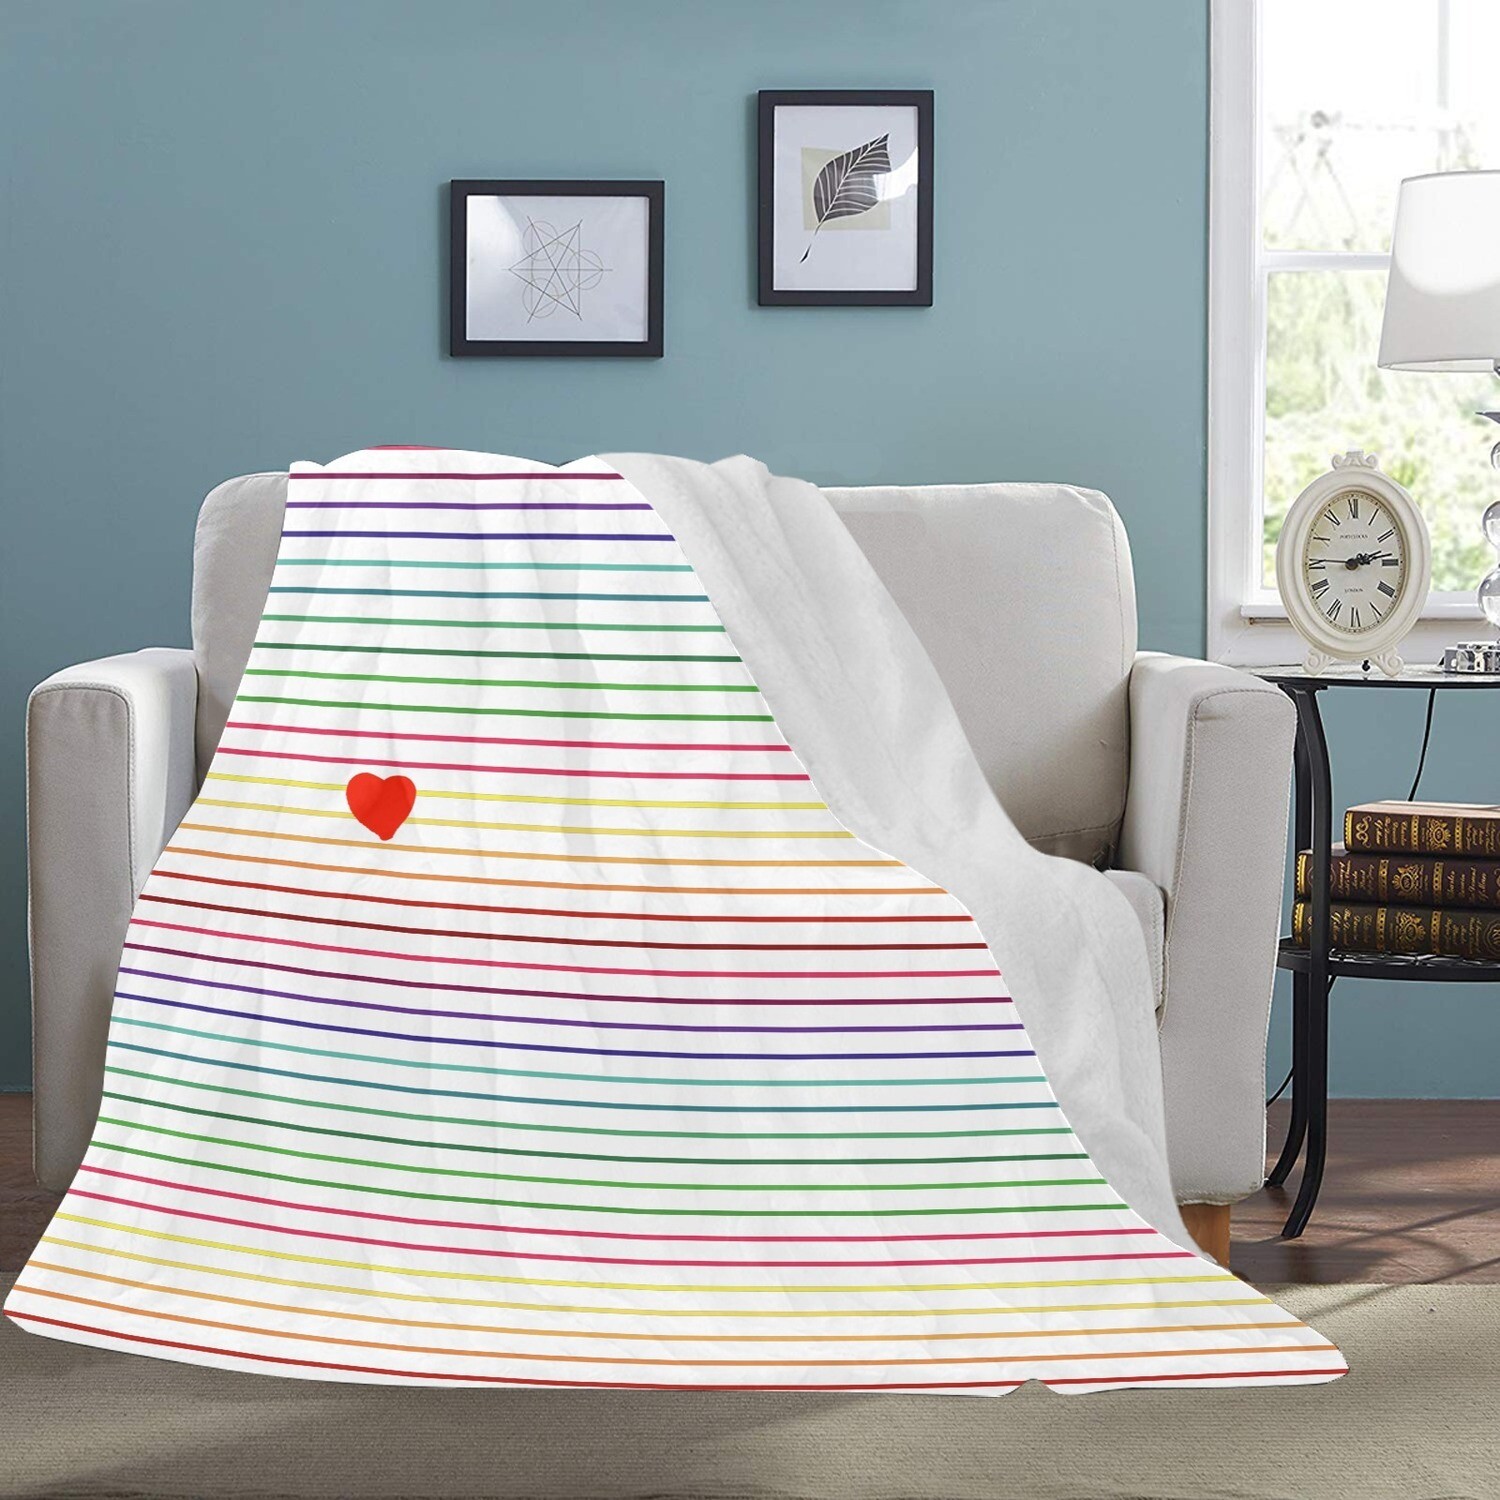 🤴🏽👸🏽🏳️‍🌈 Large Ultra-Soft Micro Fleece Blanket Love is Love LGBTQ flag, stripes and red heart, rainbow flag, pride flag, gift, gift for her, gift for him, gift for them, 70"x80", white